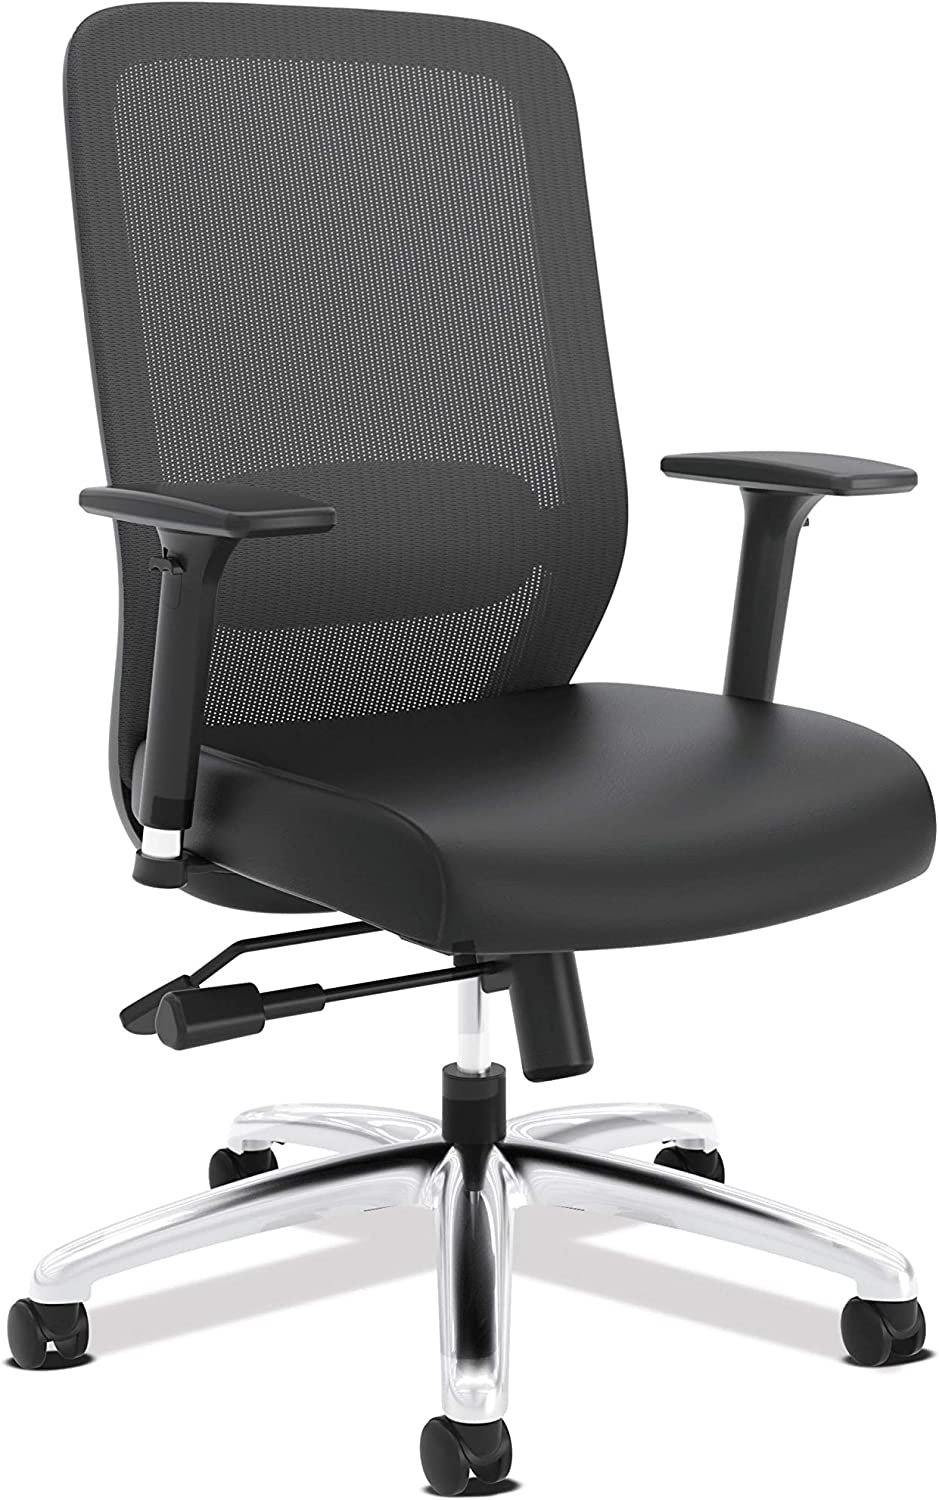 HON Exposure Task Mesh High-Back Computer Chair with Leather Seat (Black) $134.37